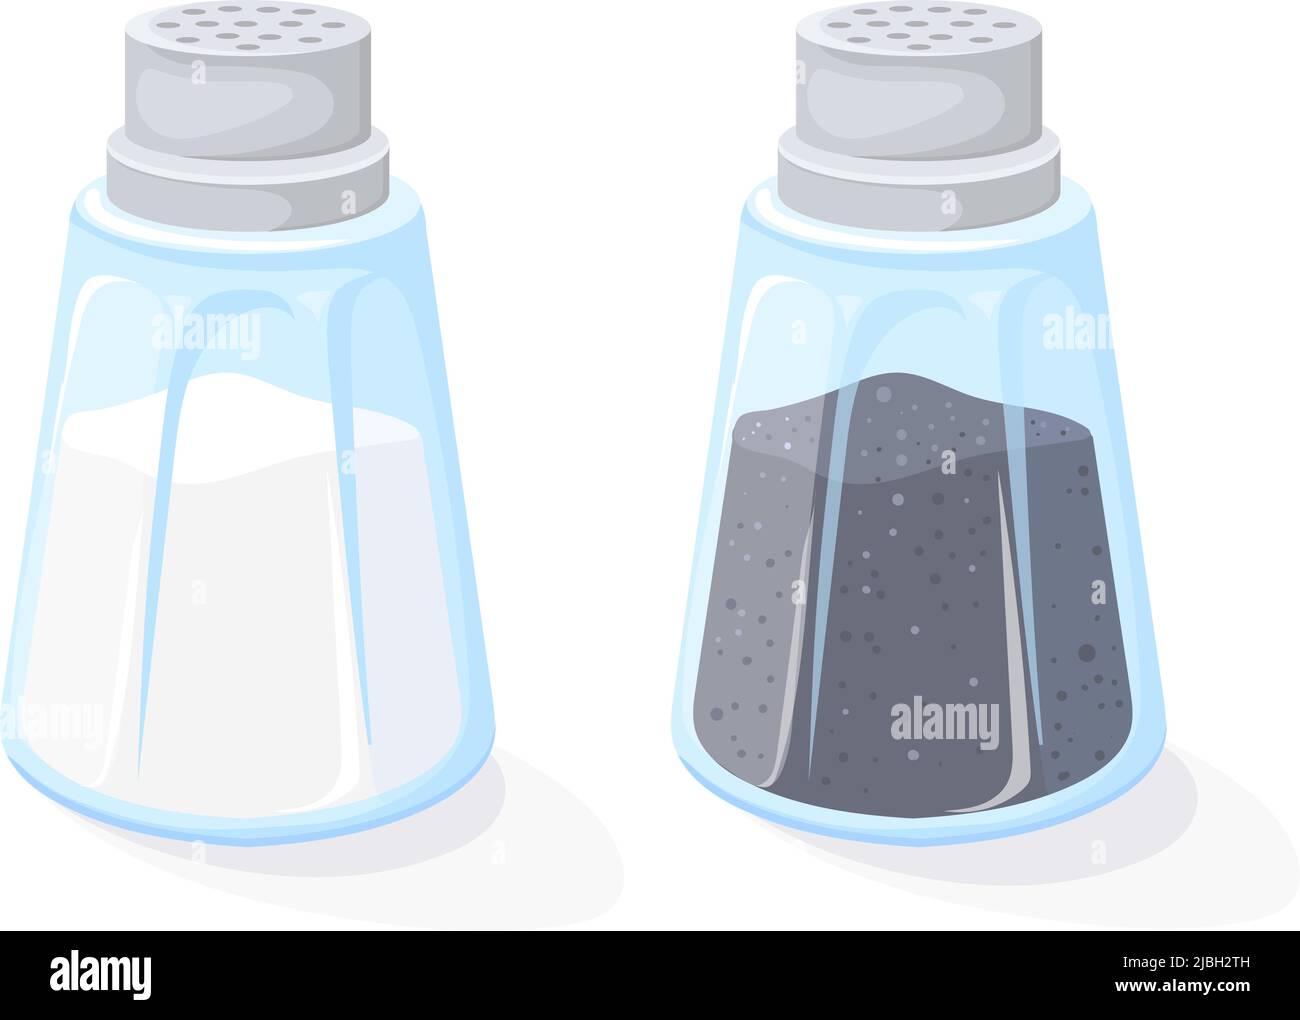 https://c8.alamy.com/comp/2JBH2TH/cartoon-salt-pepper-shakers-condiment-shaker-for-kitchen-cooking-bottle-black-seasoning-white-spice-powder-food-ingredients-saltshaker-cookery-container-neat-vector-illustration-2JBH2TH.jpg